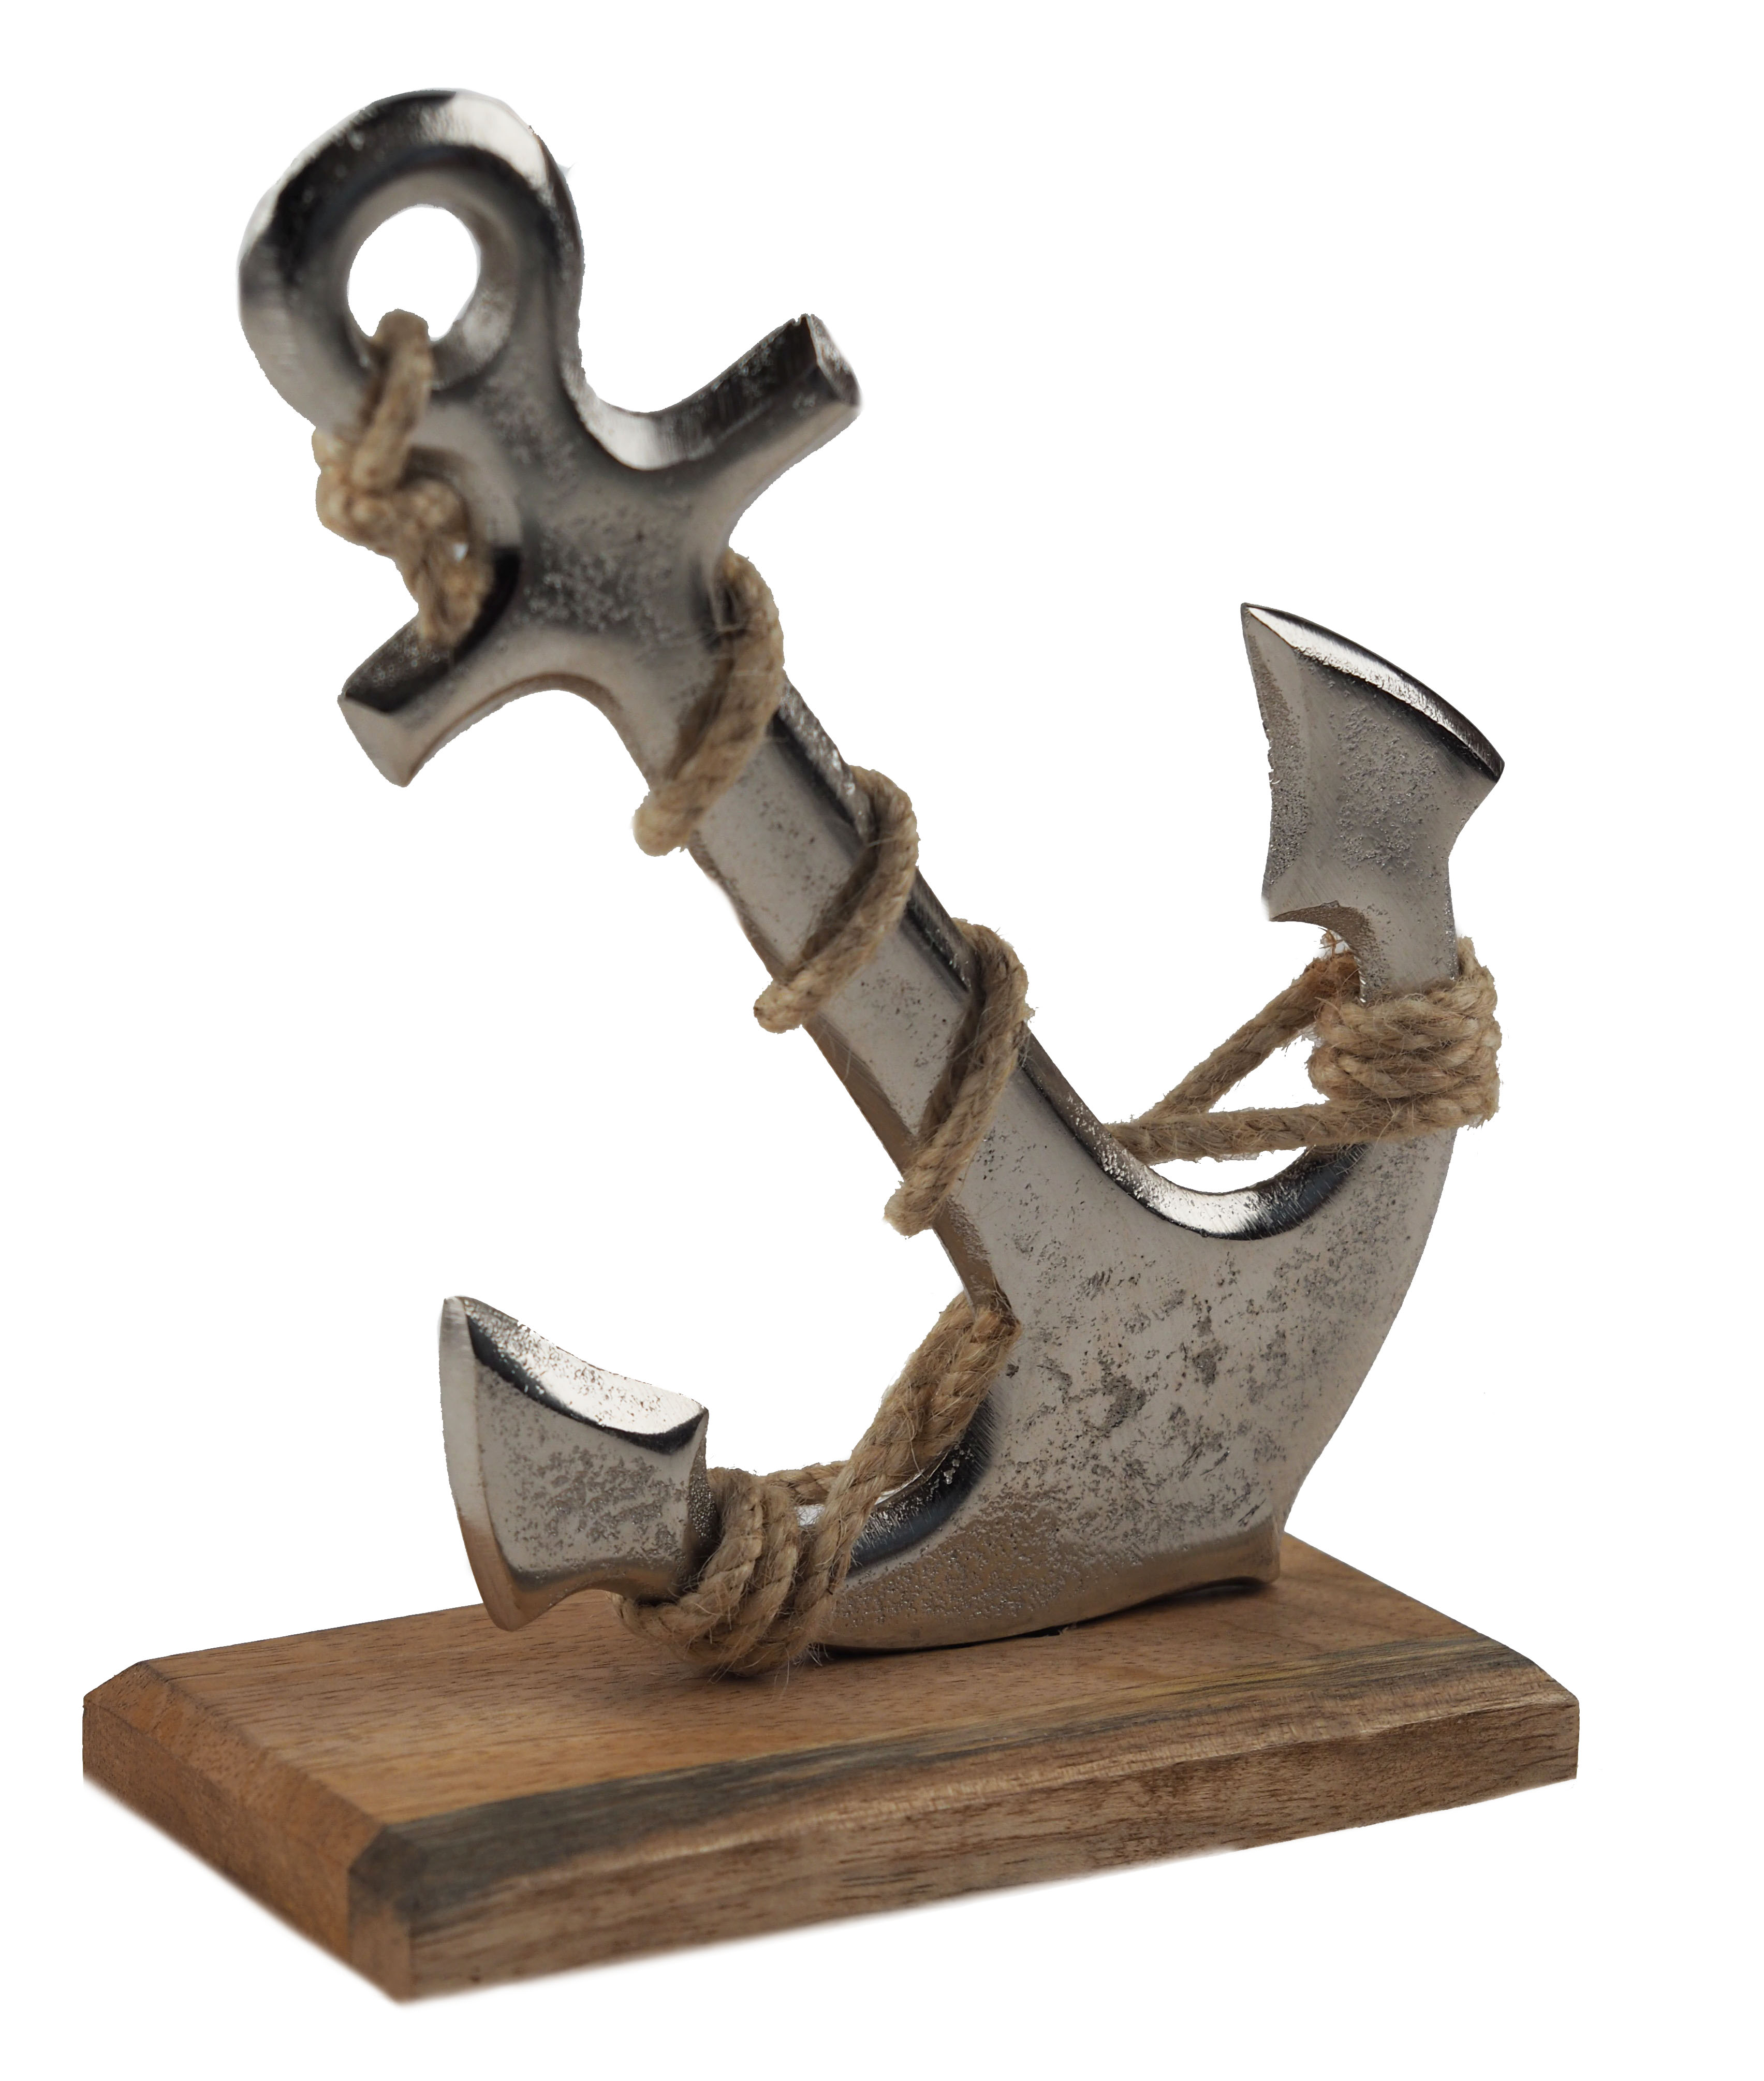 Nautical Anchor 18cm Ornament On Wooden Base - Home Decor Gift